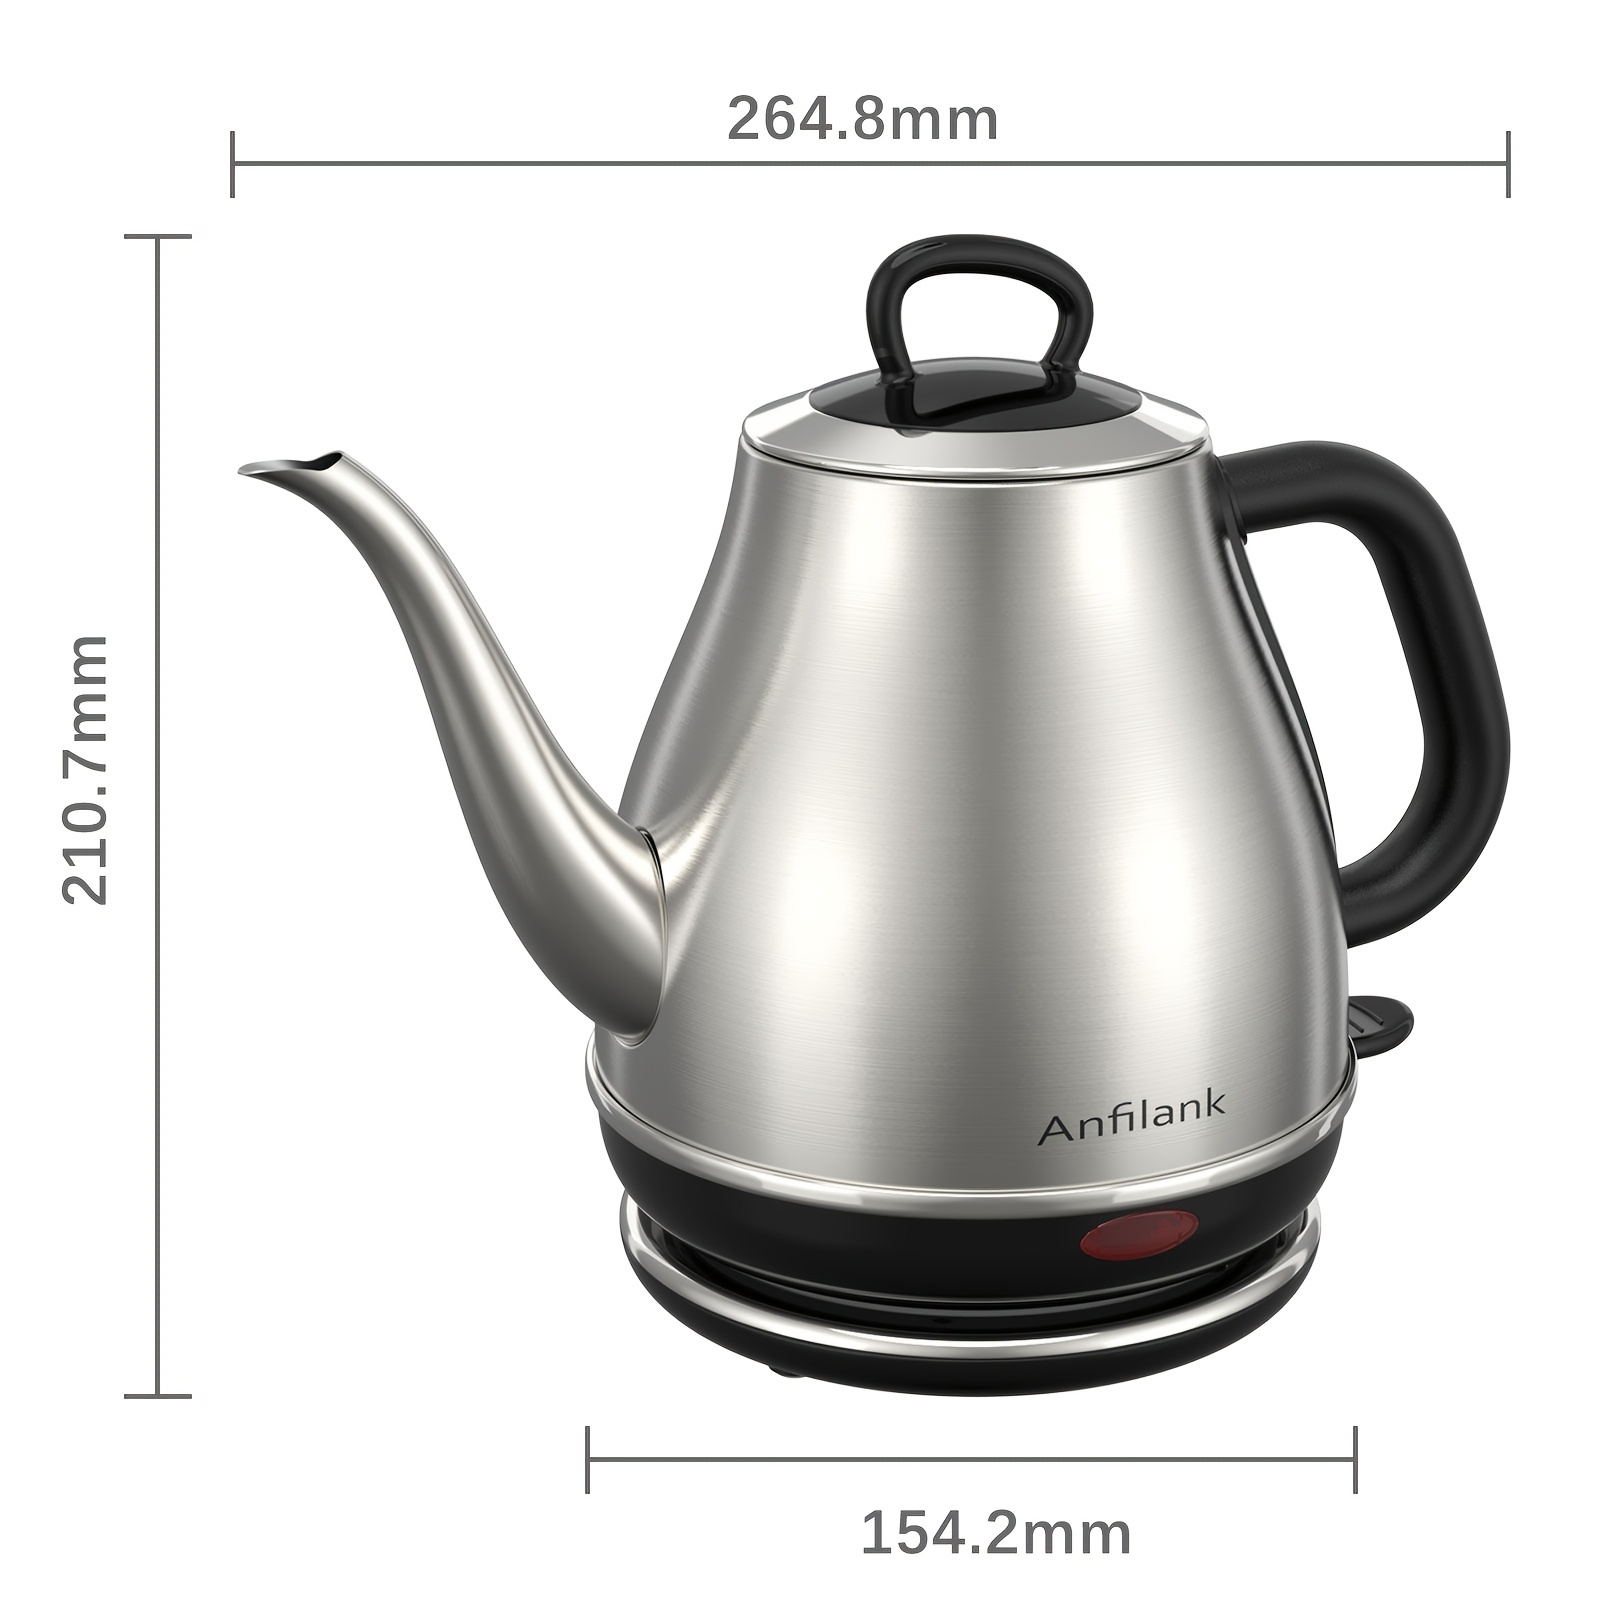 Electric Kettle, Glass Electric Tea Kettle 1.7L 1500W Retro Tea Heater &  Hot Water Boiler, No Plastic, BPA-Free, Cordless, with Auto Shut-Off and  Boil-Dry Protection (Creme) 